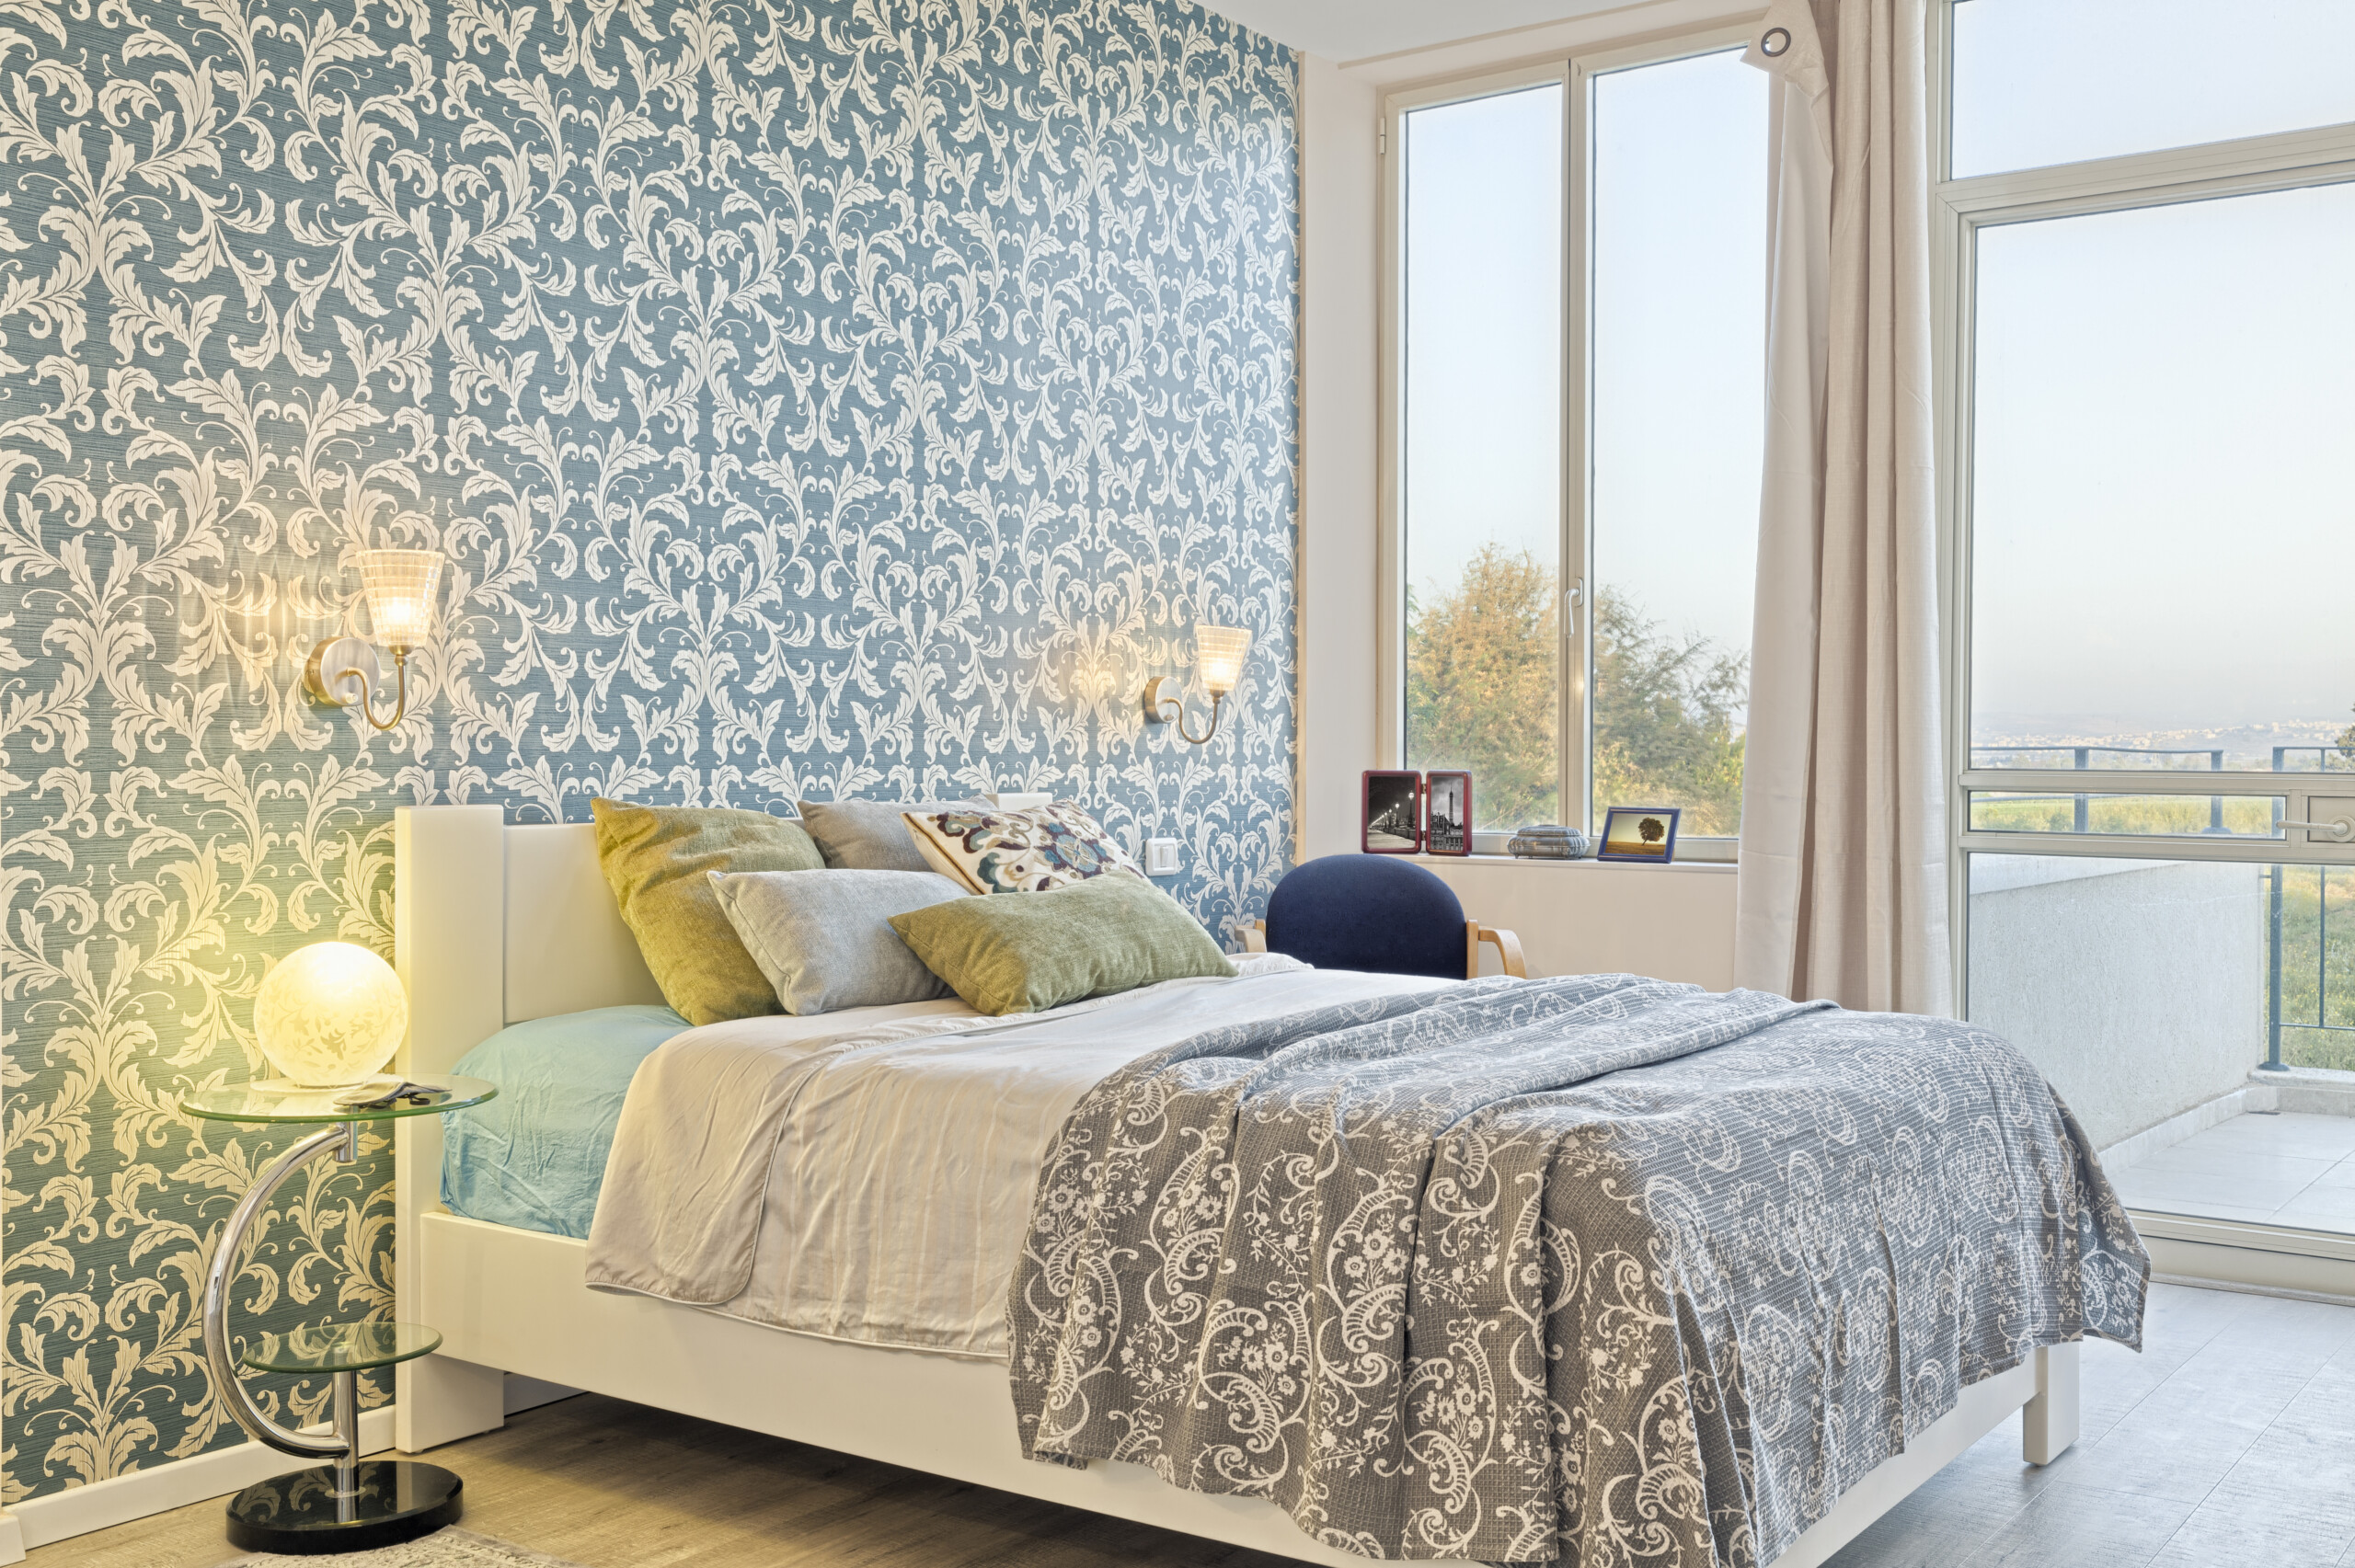 19 Simple But Beautiful Wallpaper Designs For Every Bedroom